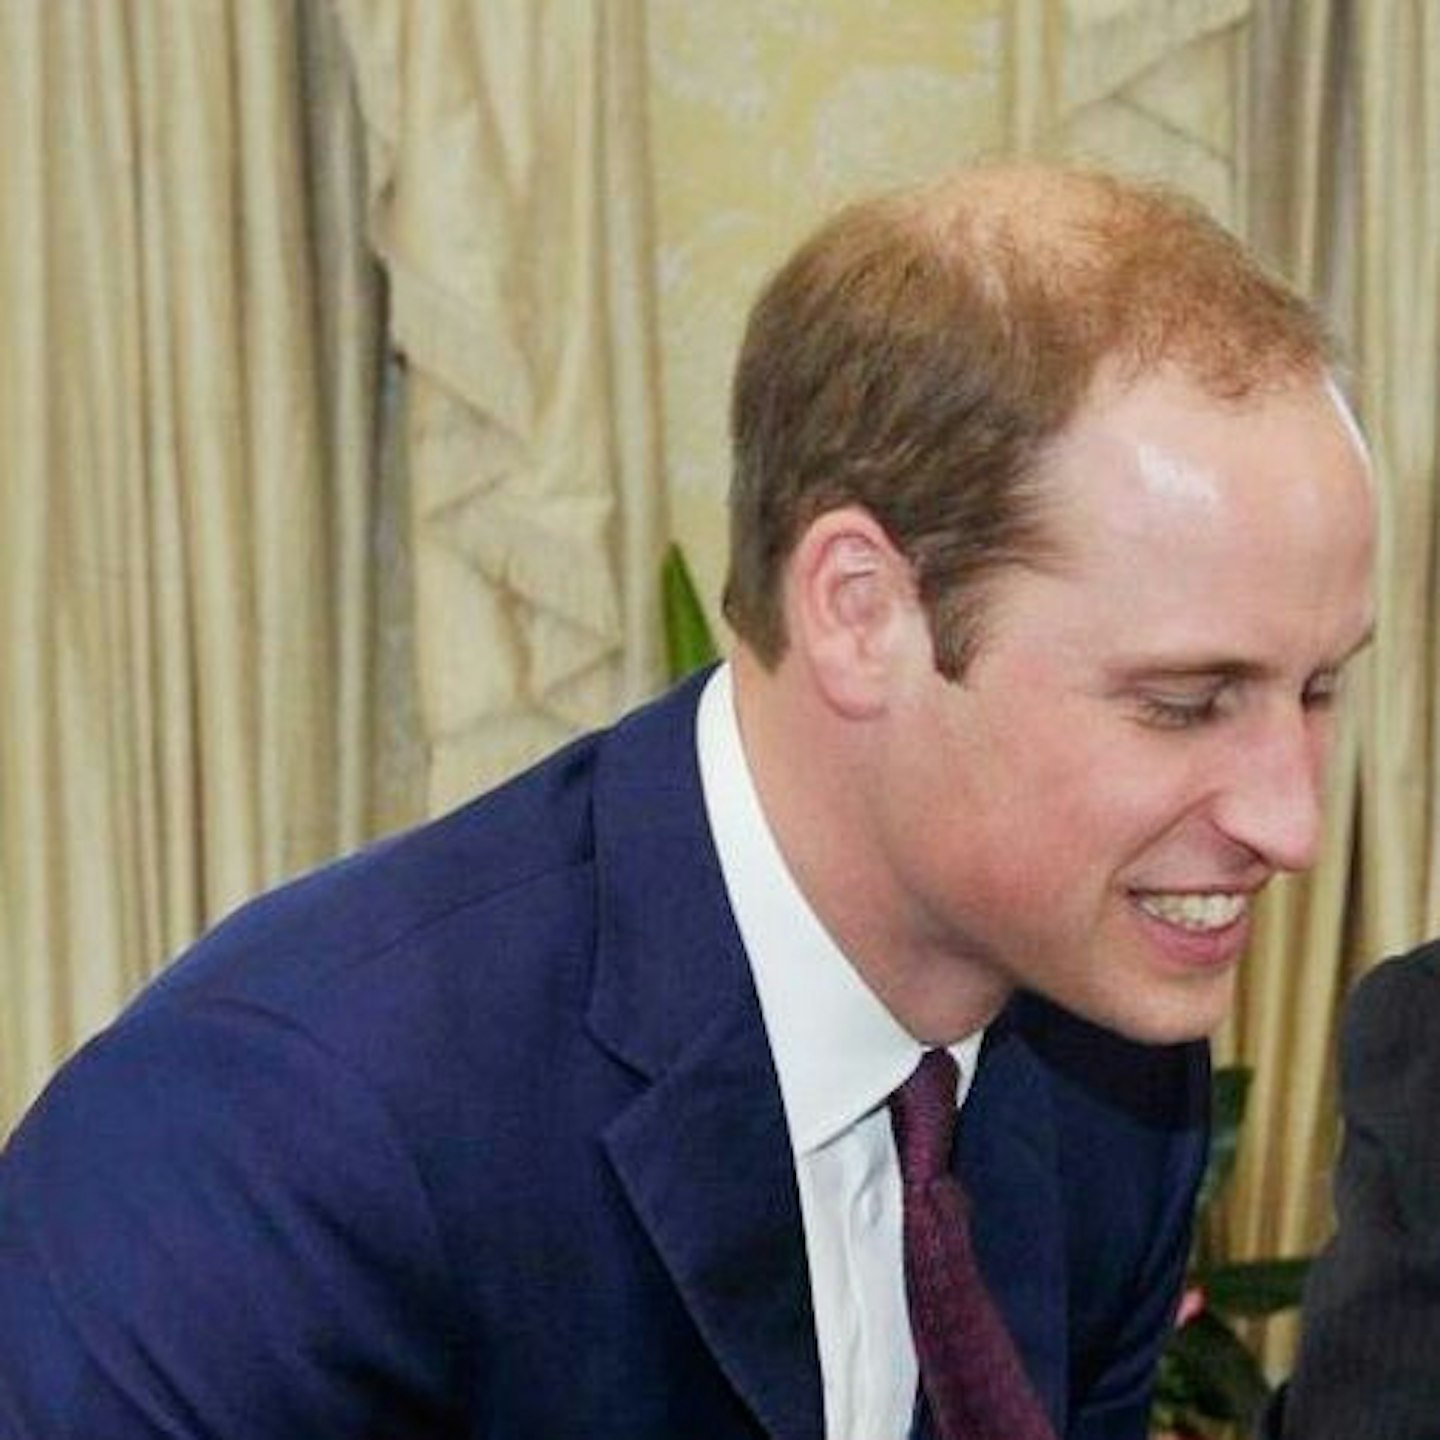 Prince William, Duchess Catherine and their baby son, Prince George